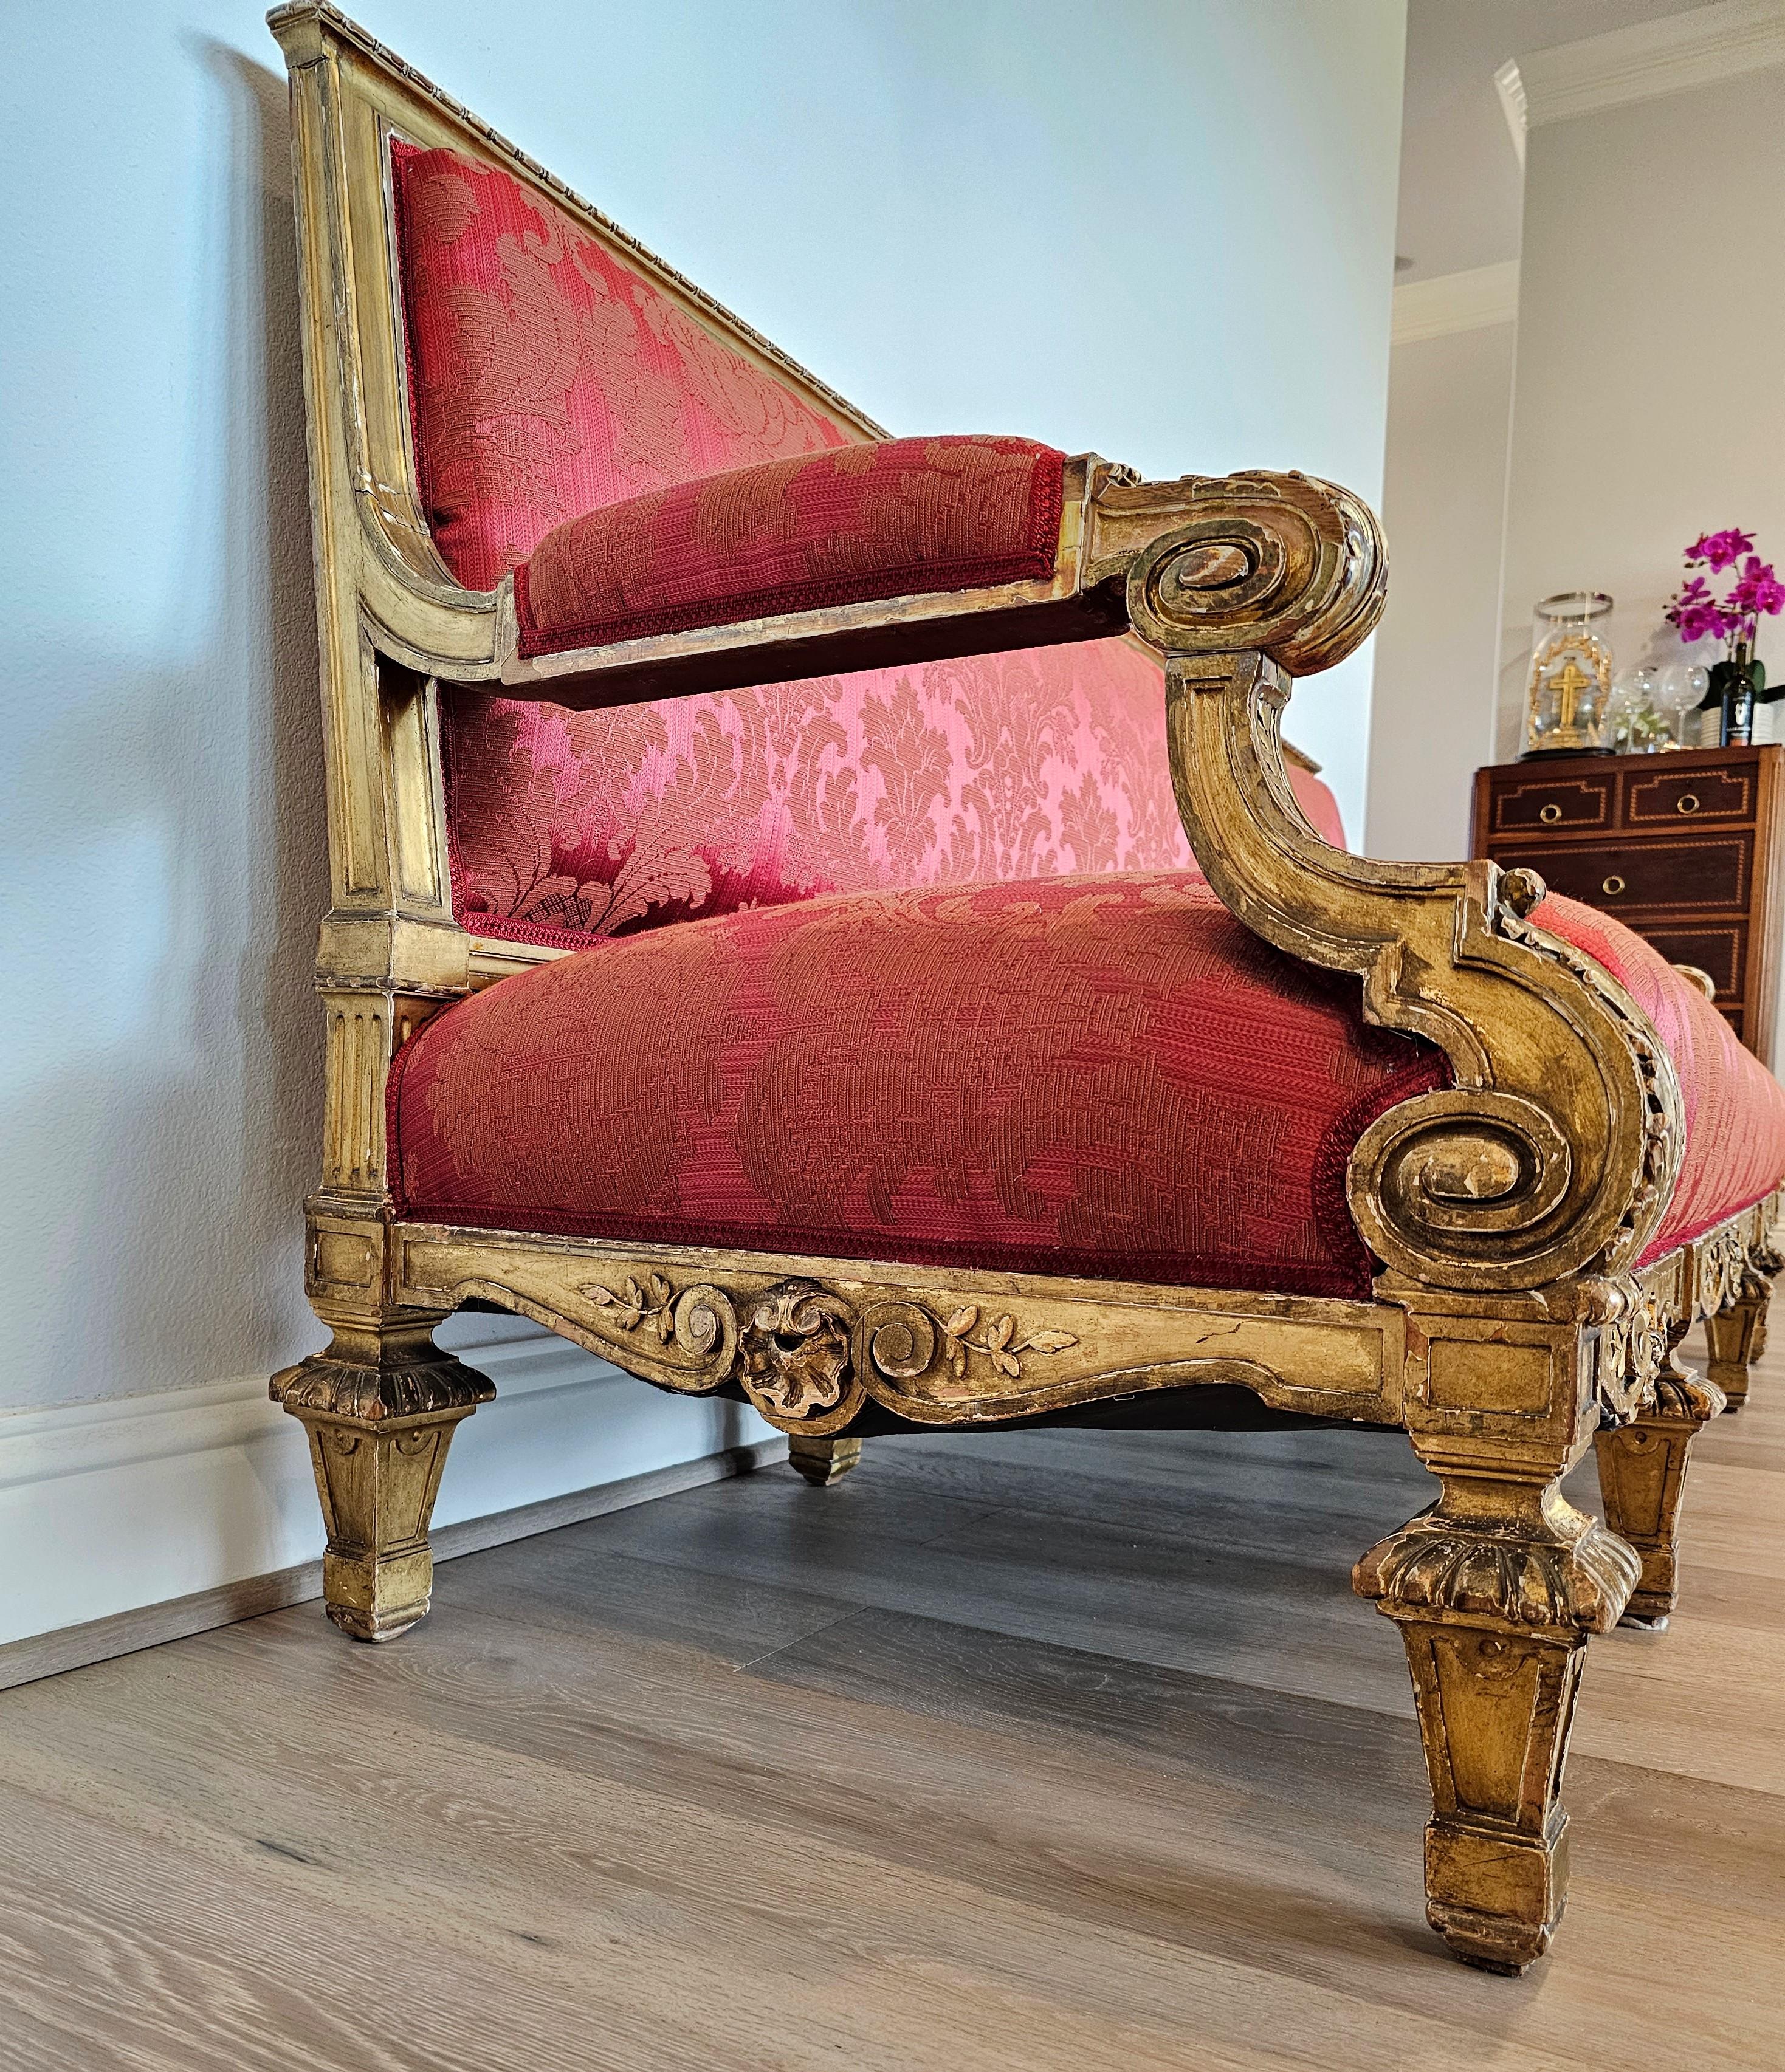 20th Century Antique French Louis XVI Style Giltwood Damask Upholstered Long Sofa Set For Sale